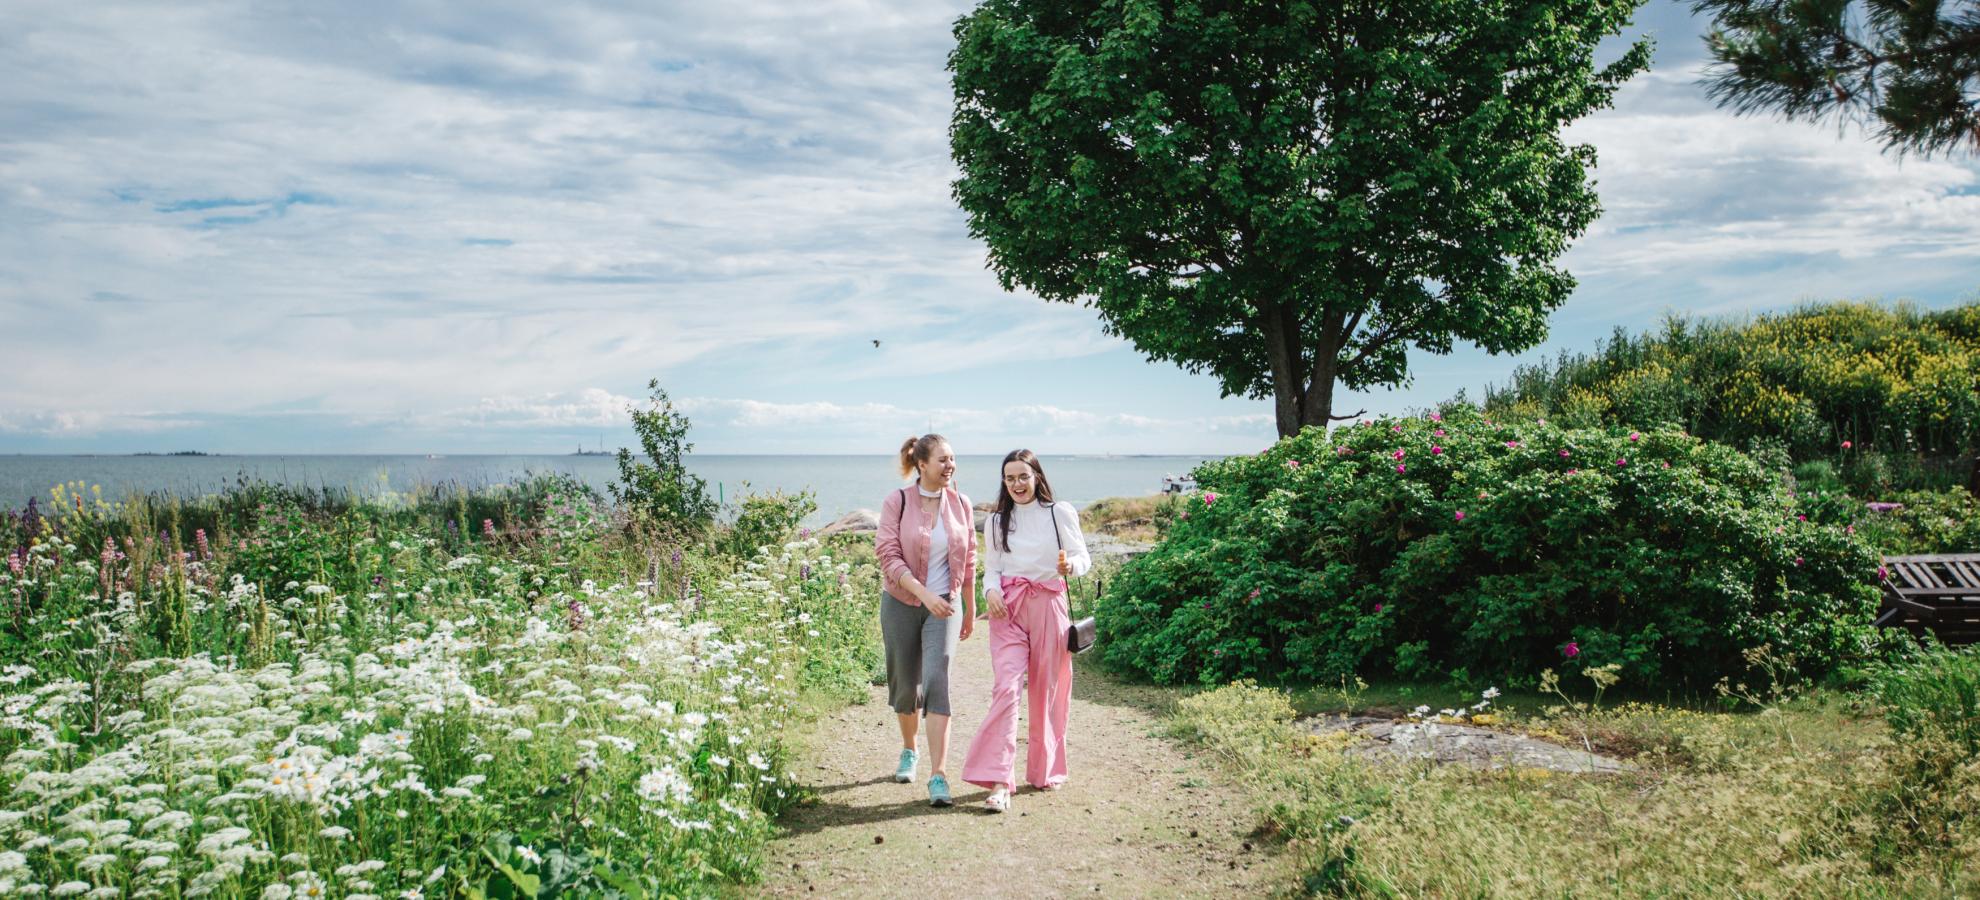 Walking towards the camera, two girls stroll along a path on Suomenlinna during a sunny day. Either side of the path are wildflowers, bushes and a tree, with the sea just seen on the horizon.